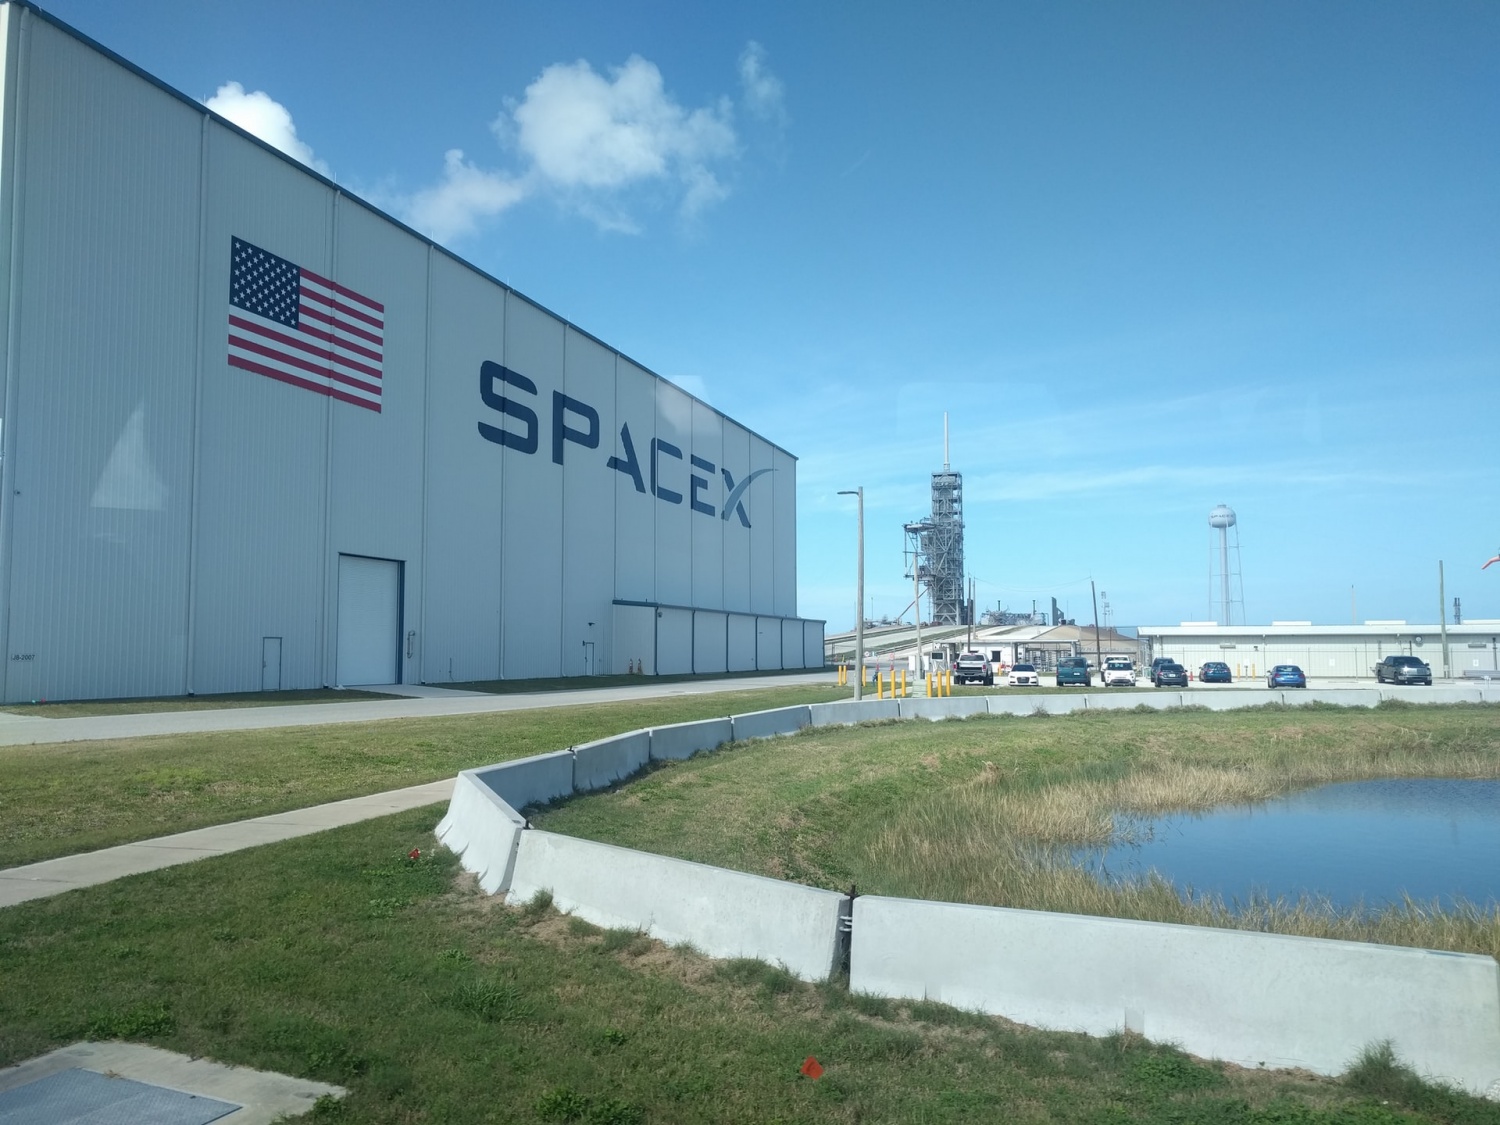 SpaceX’s Starlink Overheating Issue May Be Resolved with Software Update, But Man Just Used Water Sprinkler